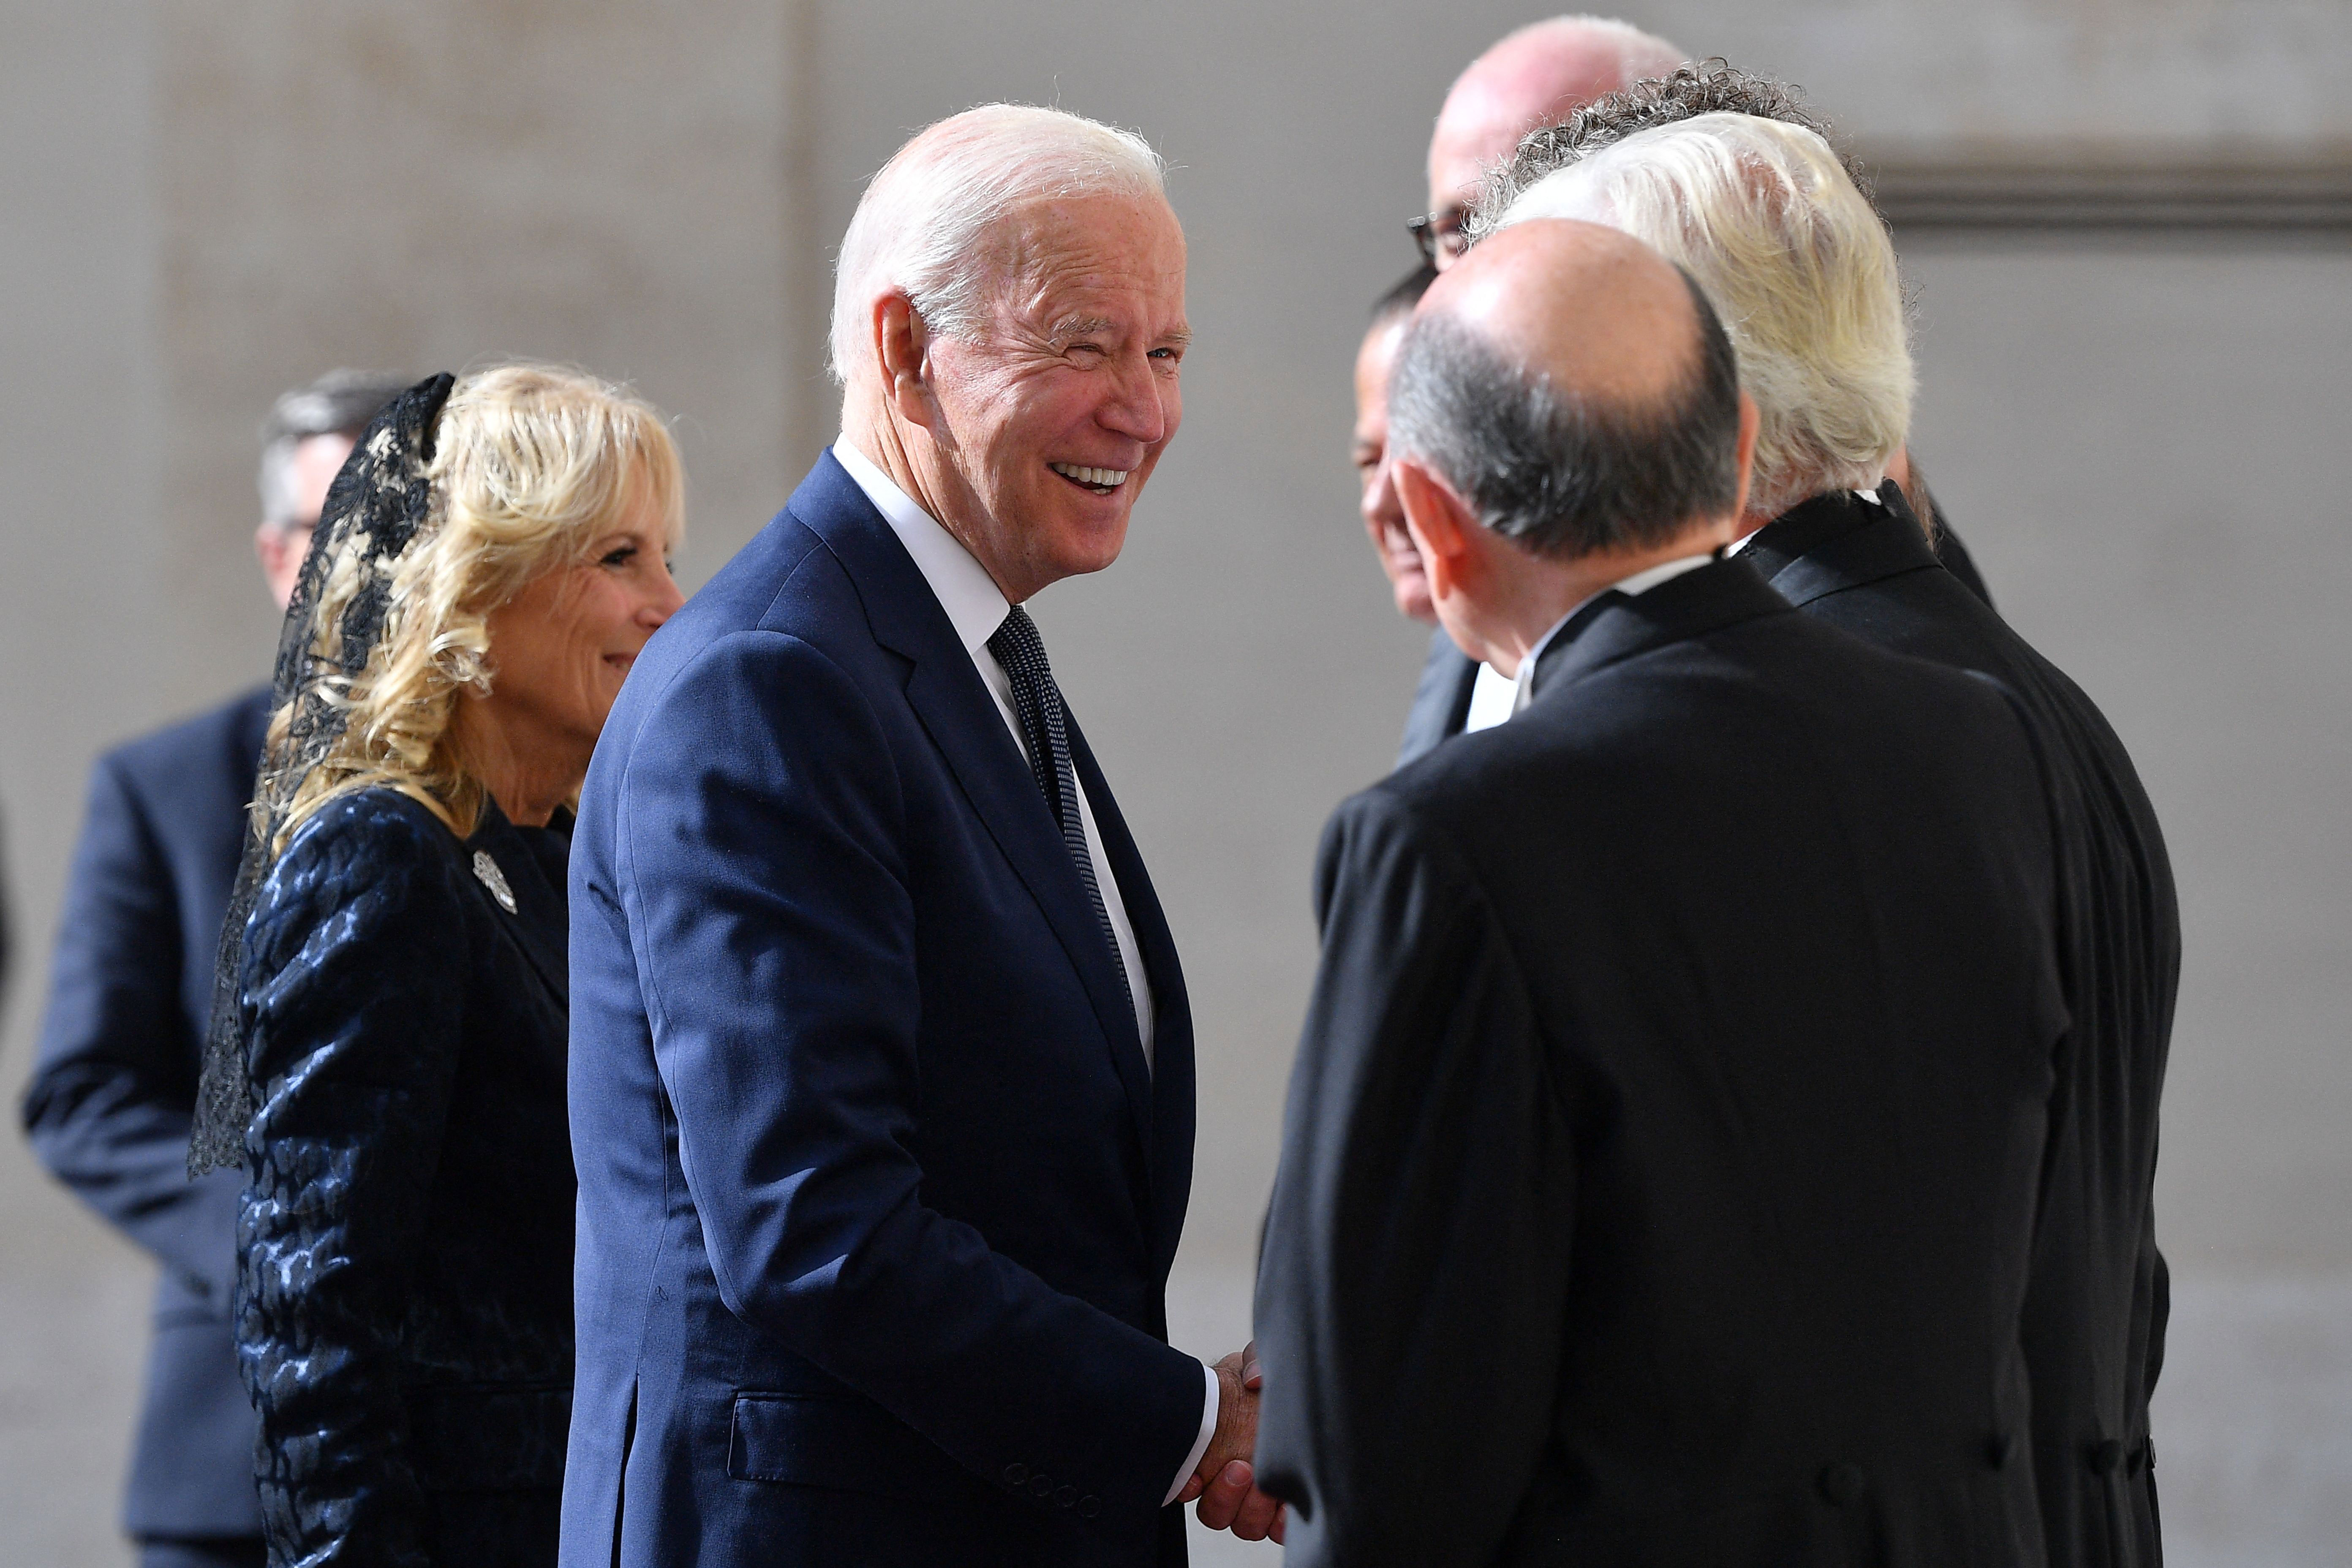 The Pope's gentlemen greet President Joe Biden and first lady Jill Biden as they arrive at San Damaso courtyard in the Vatican on October 29.